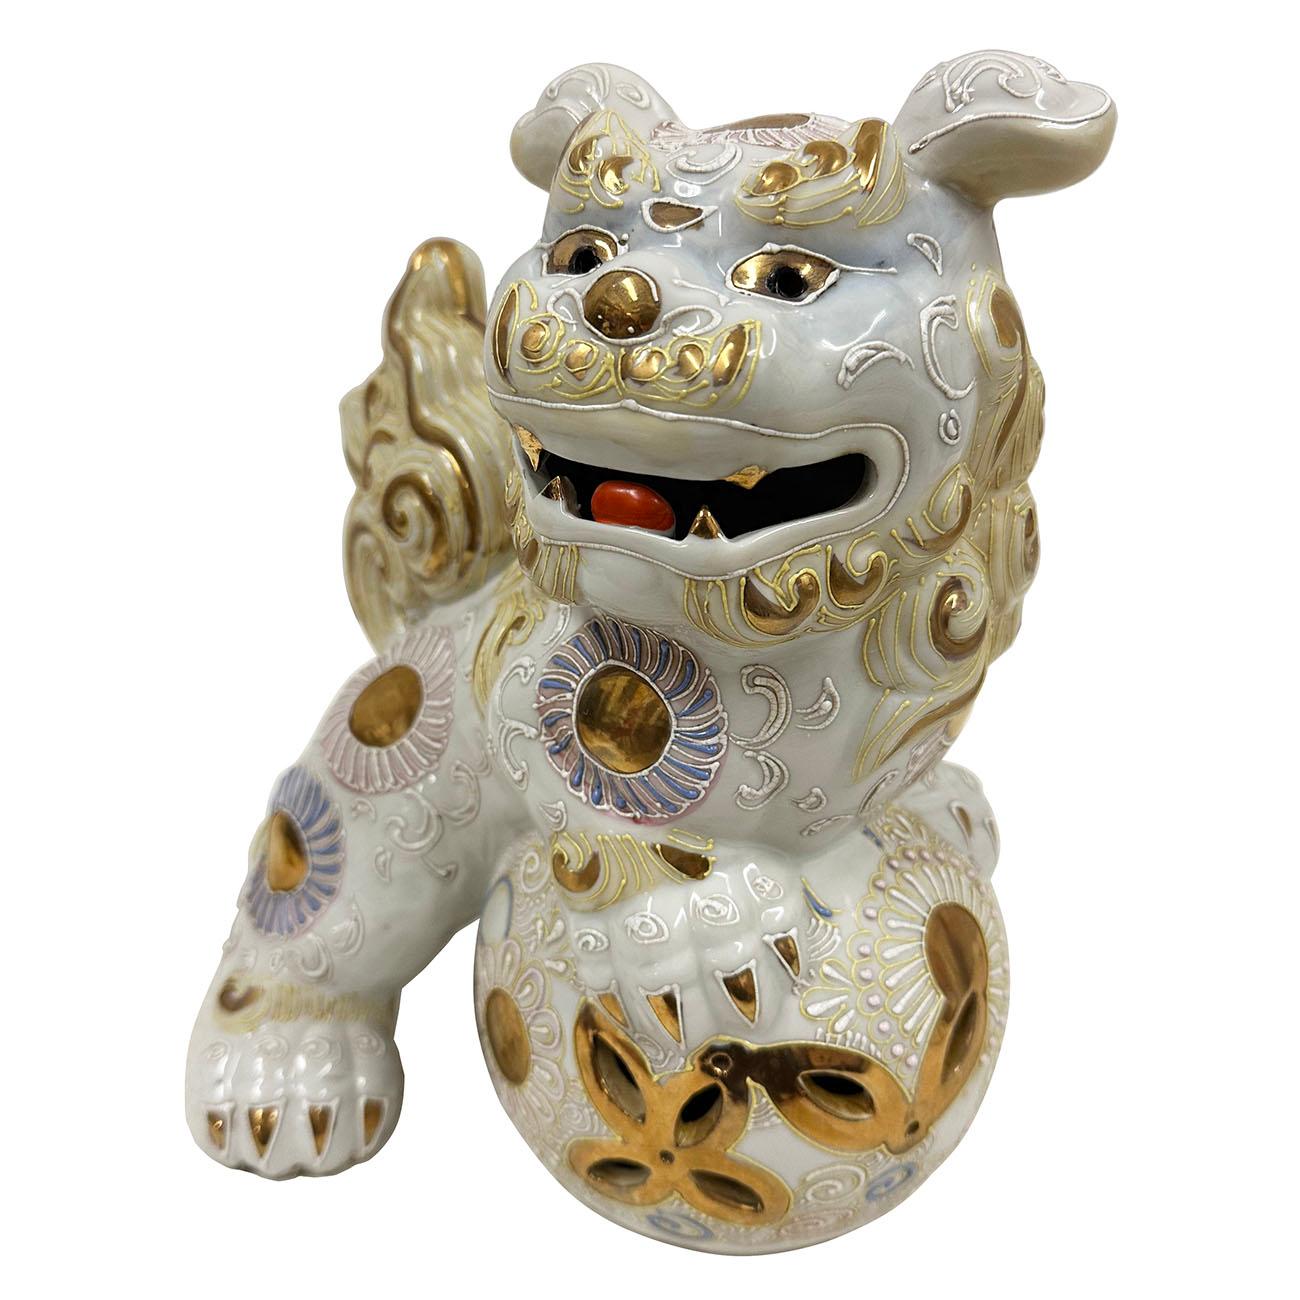 This fine Vintage Japanese Ceramic/Porcelain Lion/Foo Dog Statuary was hand crafted by Kutani in Japan. It has beautiful color glaze with gilt and detailed carving works shows this happy foo dog is playing with ball. It also called Shi Shi Foo Dog